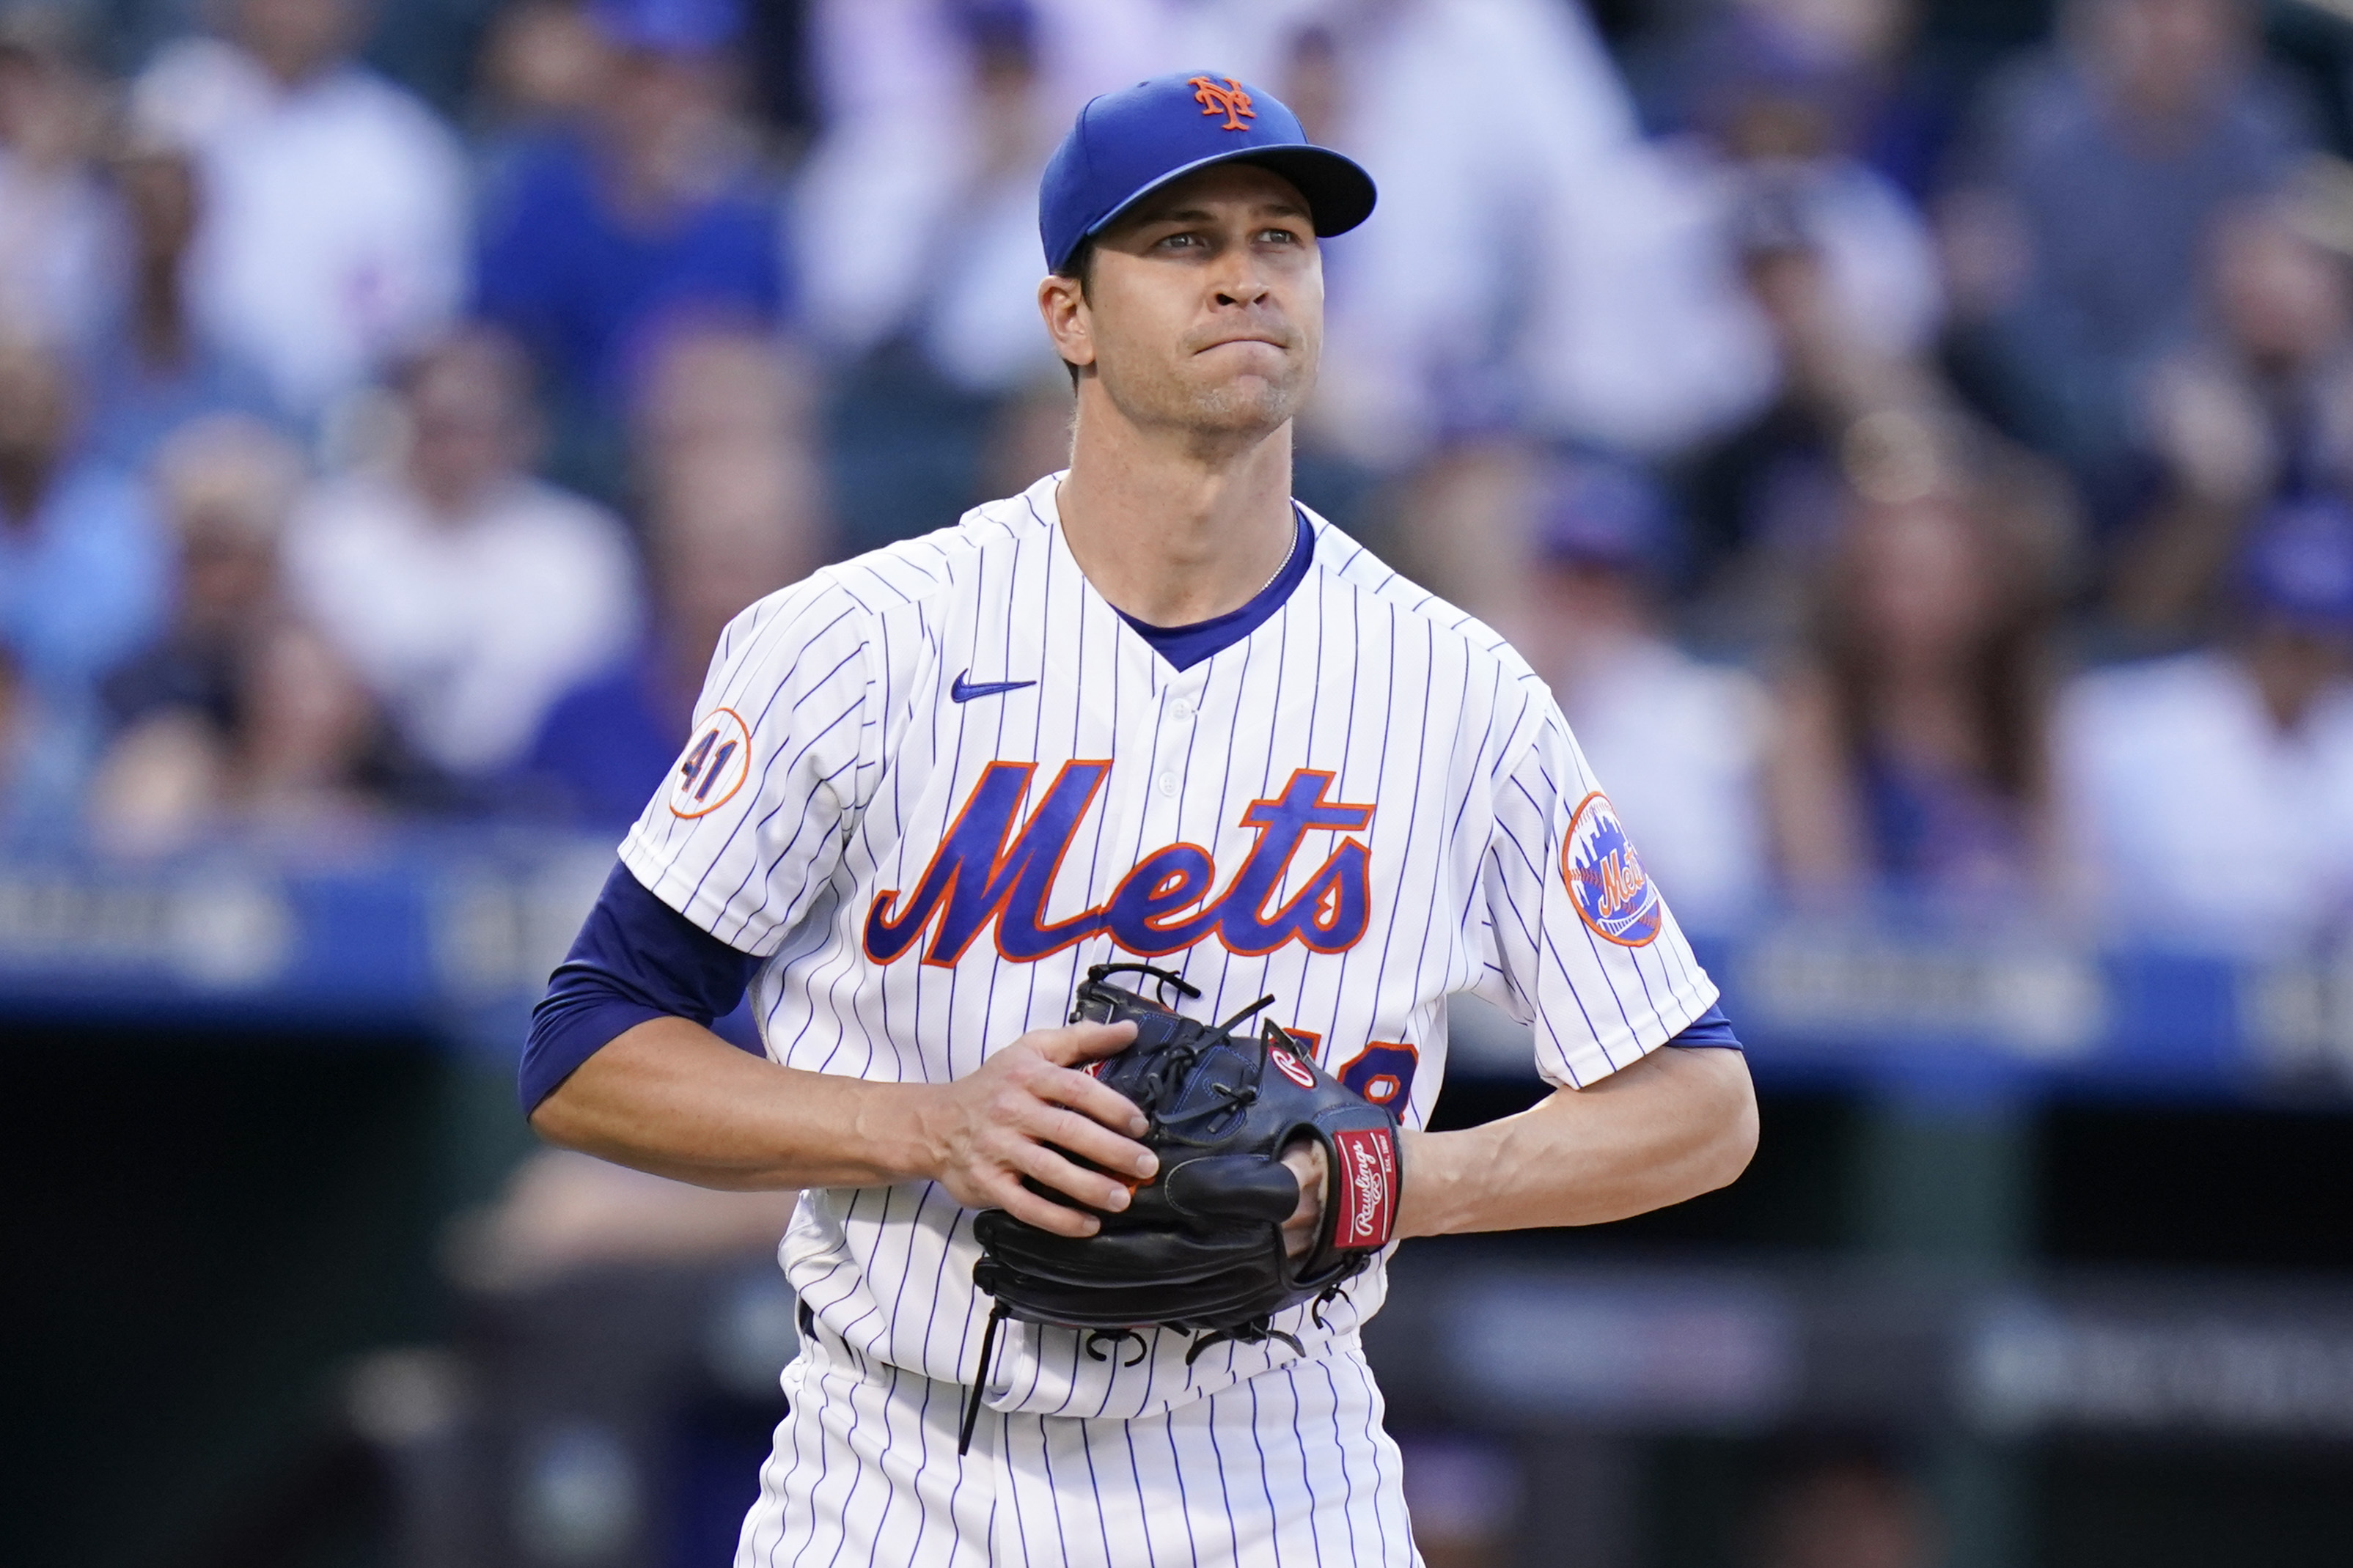 Mets dispose of Nats, 7-3, on eve of Jacob deGrom's return